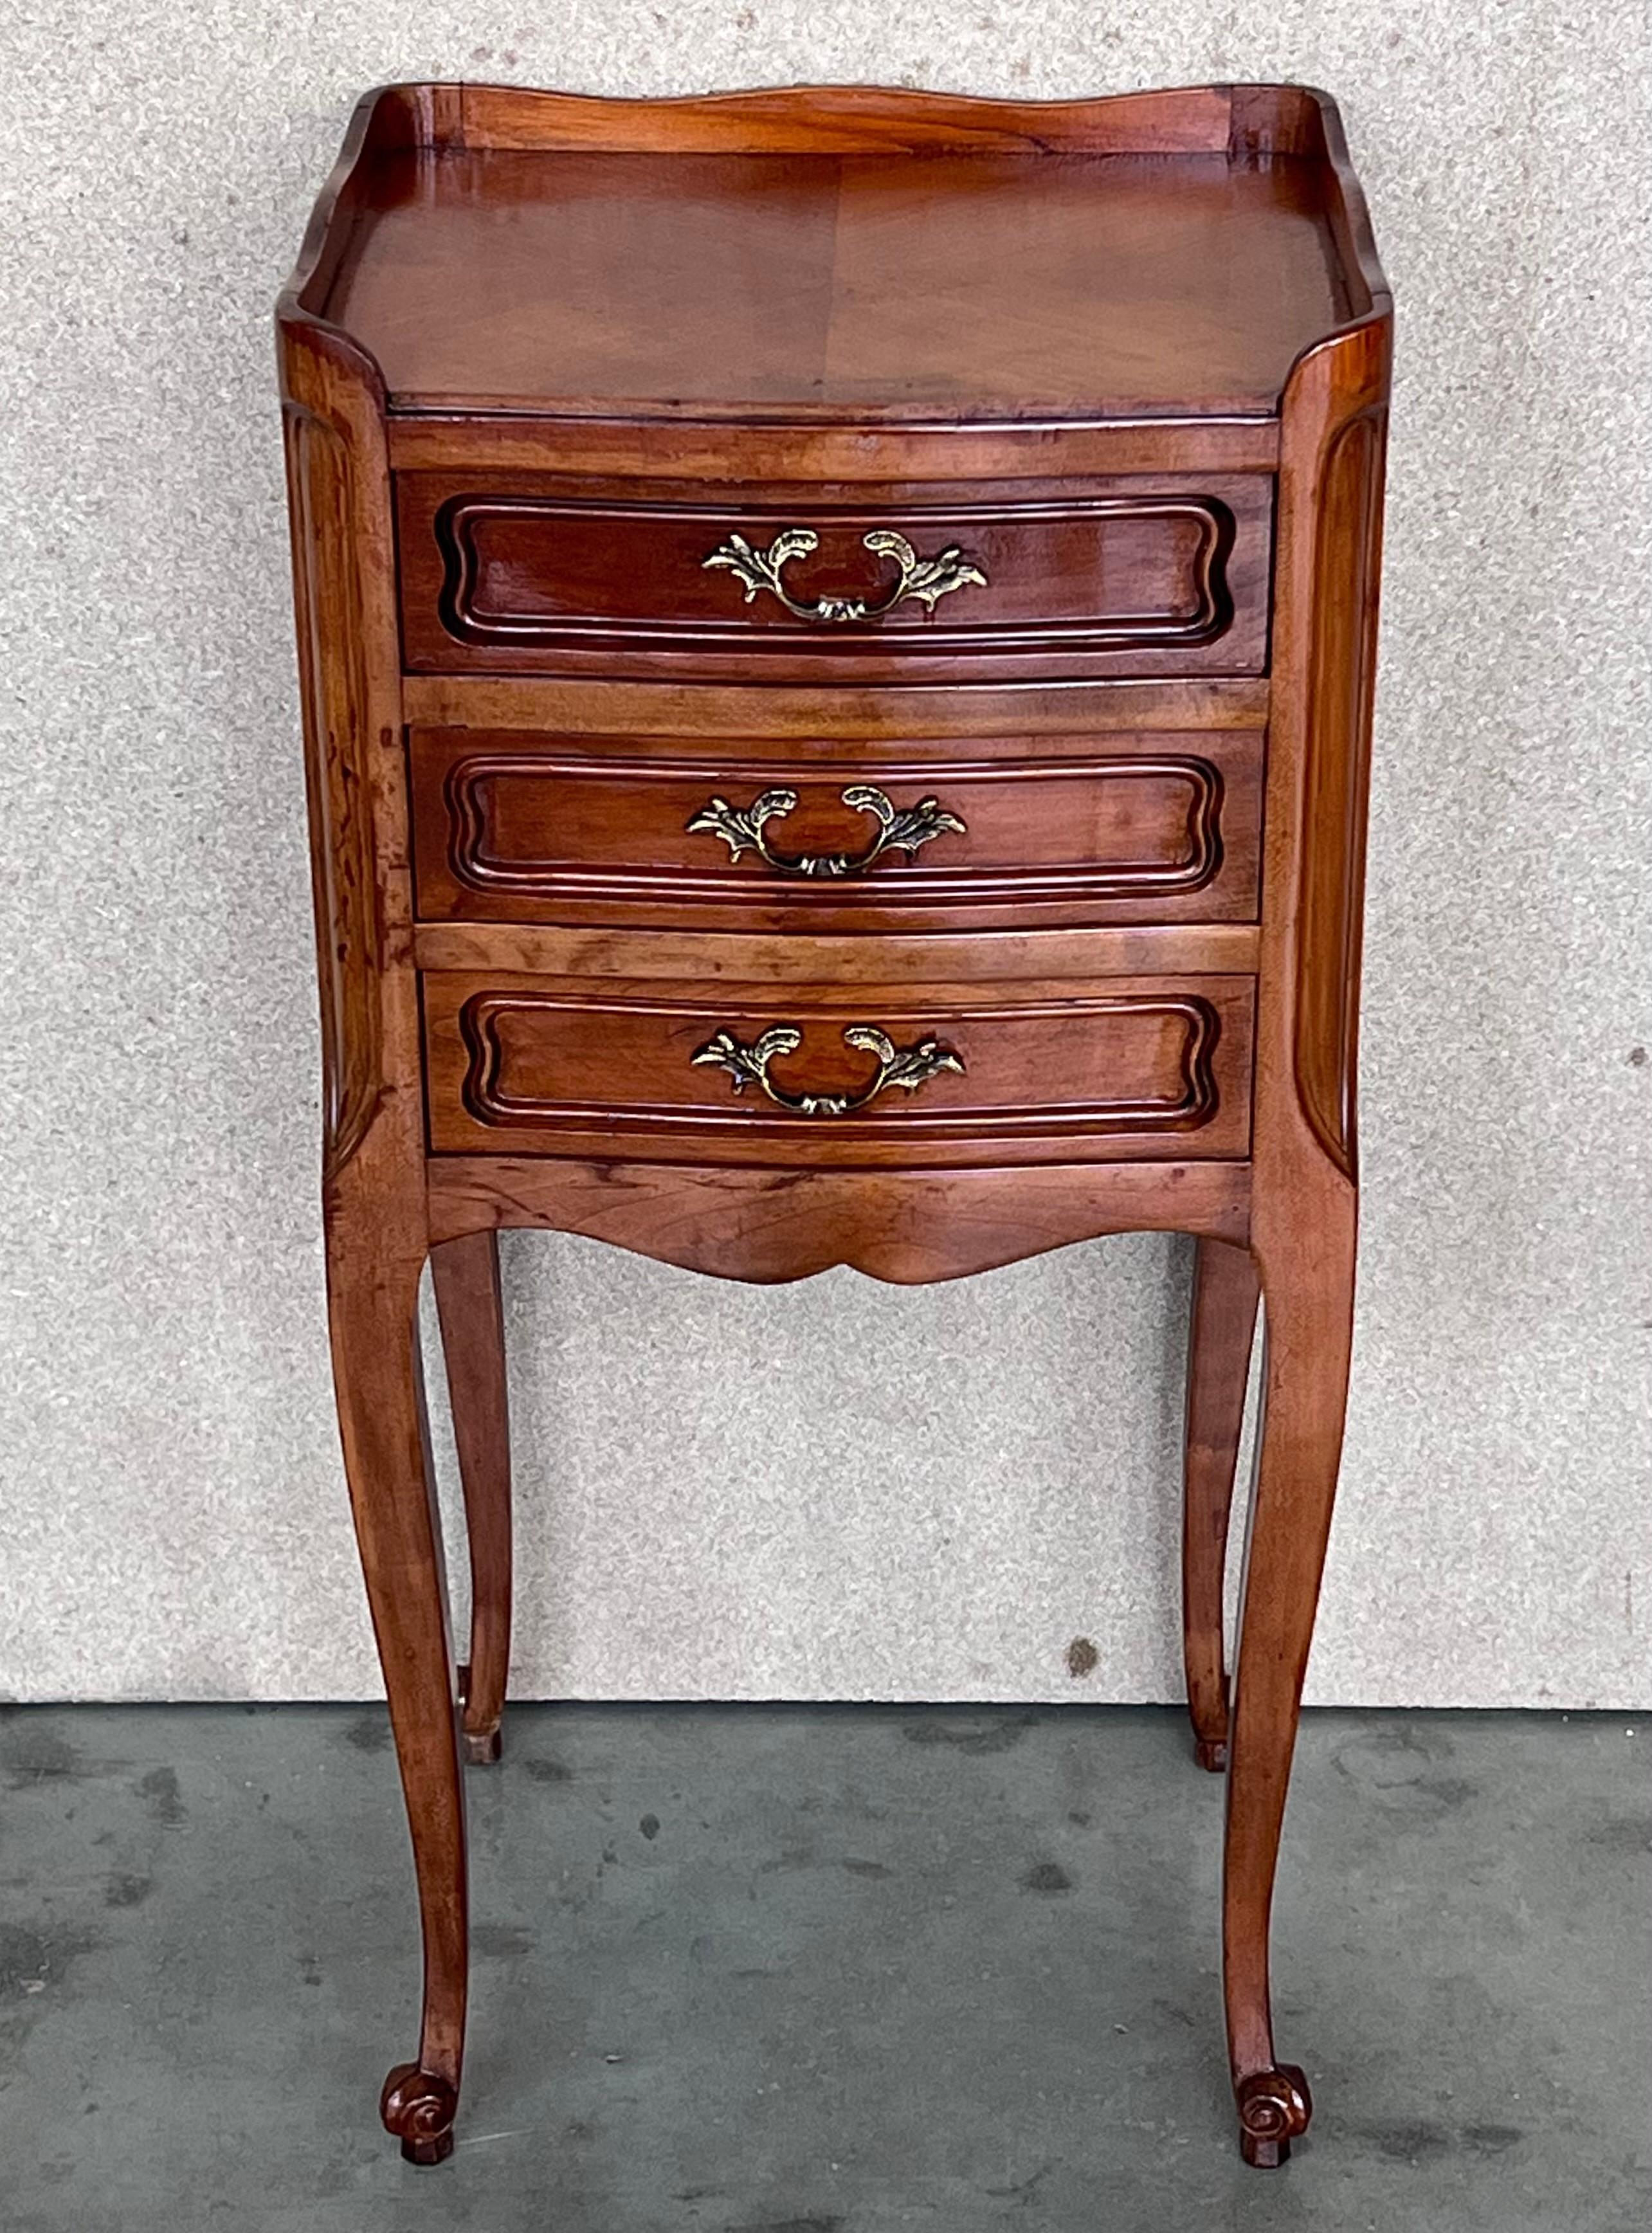 A pair of Antique French Louis XV Marquetry top nightstands. Subtle contours and scroll shapes are evident in the corner posts and legs, which support serpentine sides and an arched front façade for a curvaceous effect. The tops are luxurious